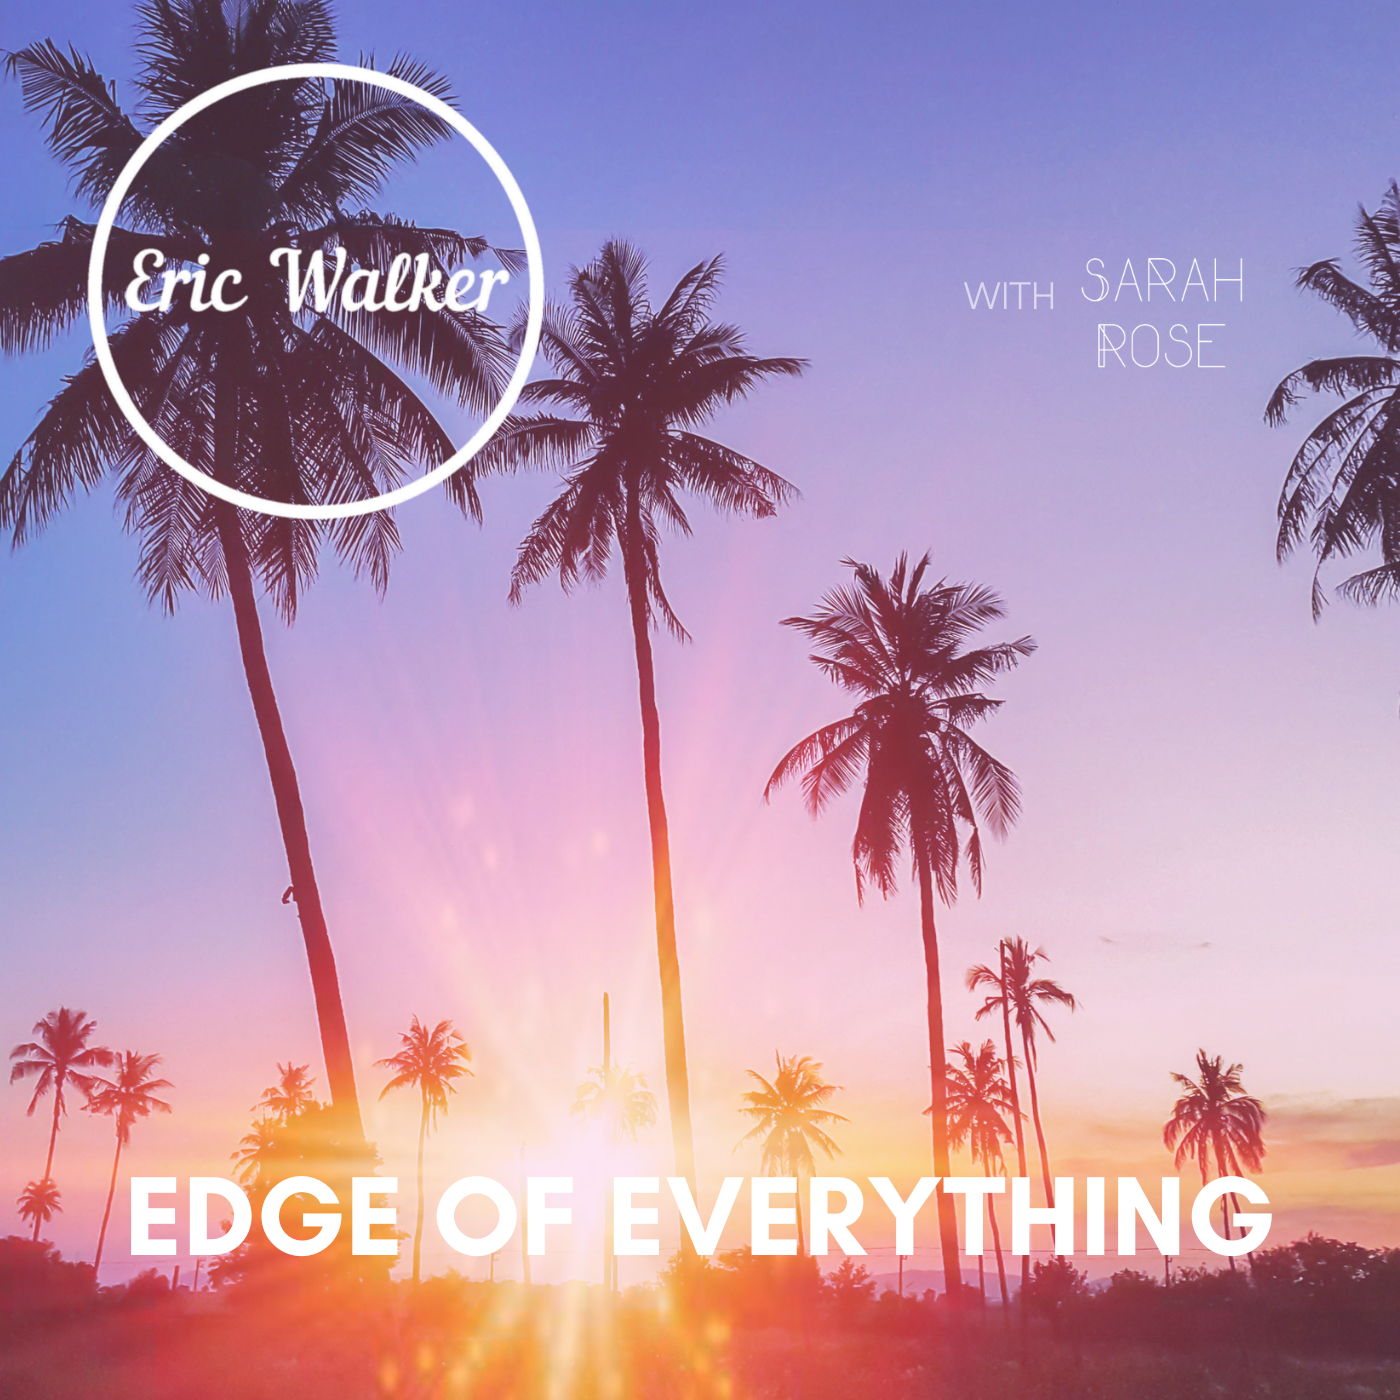 Eric Walker ft. featuring Sarah Rose Edge Of Everything cover artwork